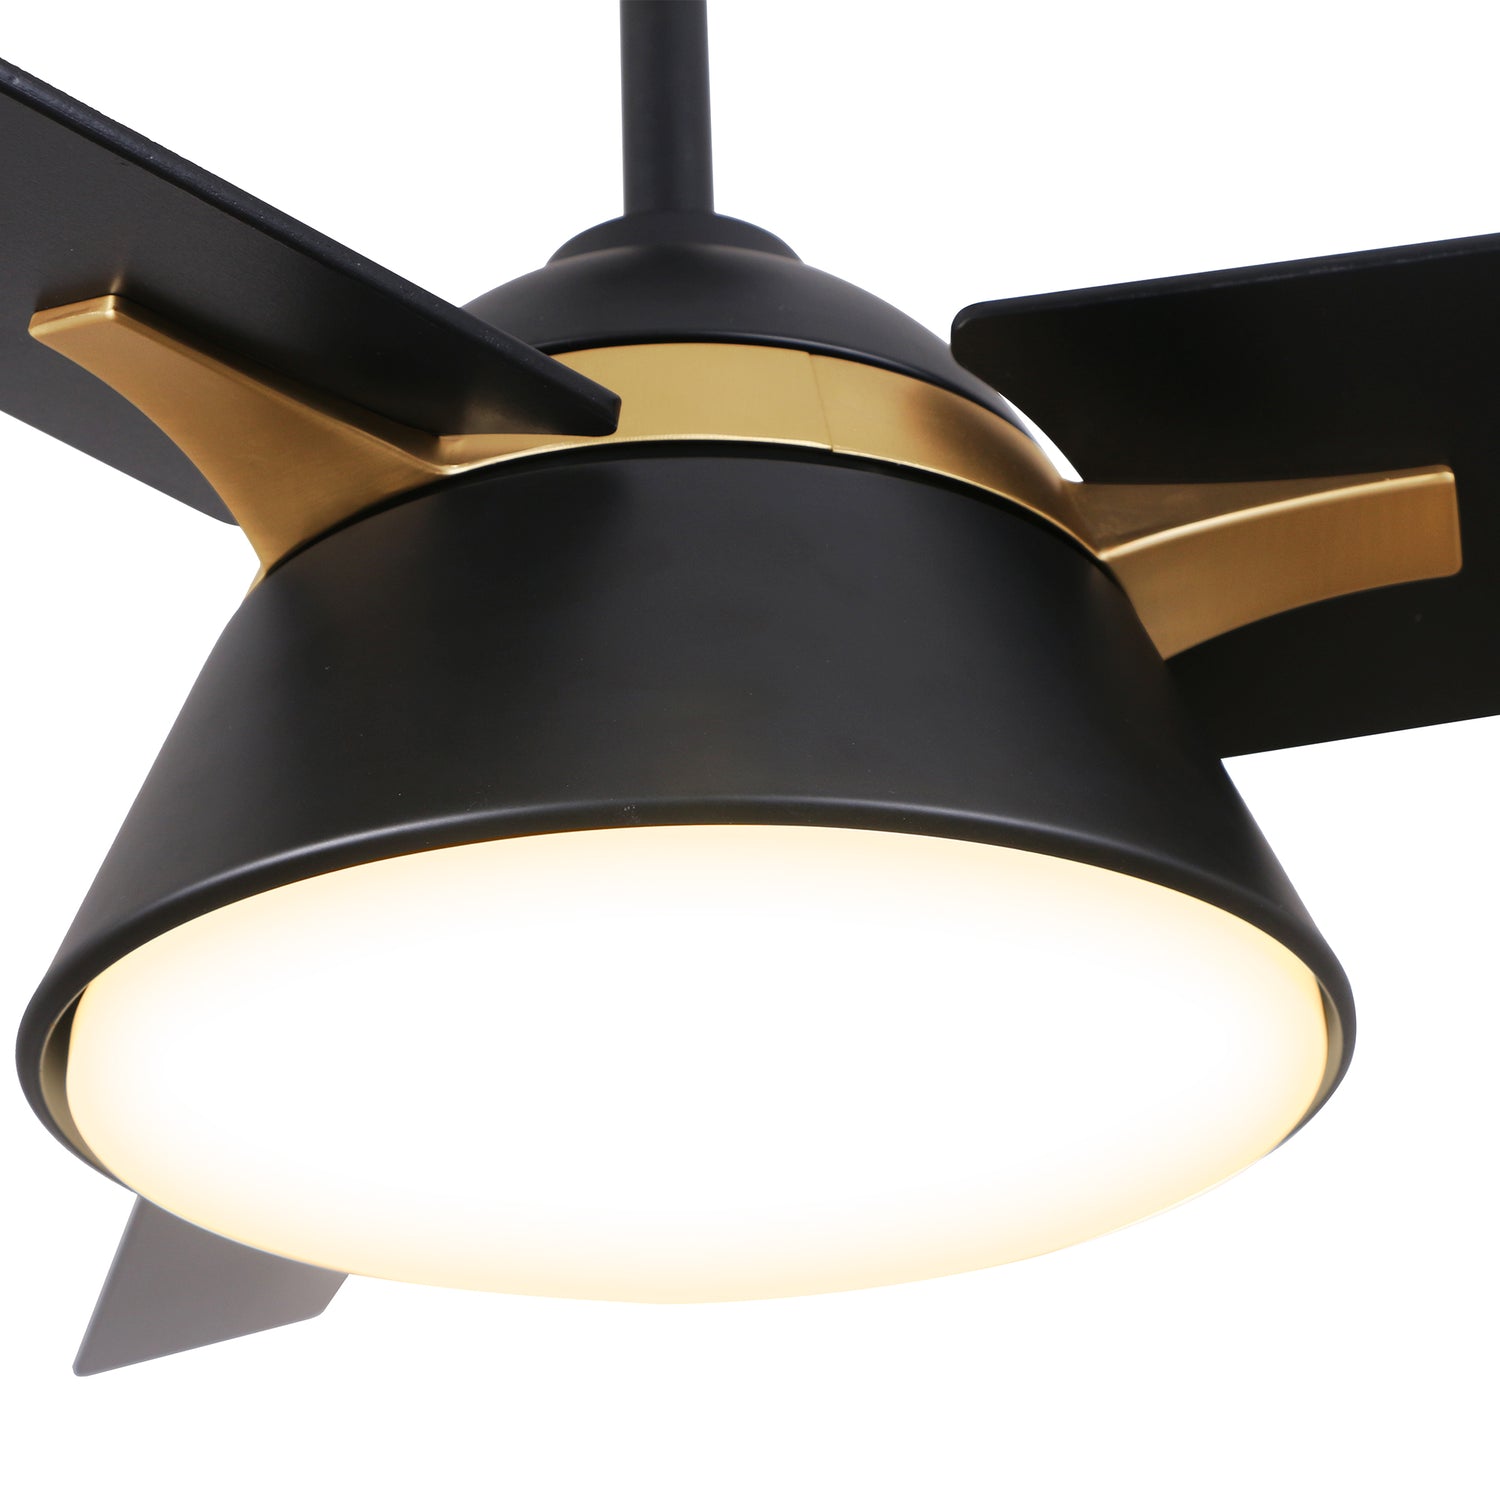 This Smafan Lismore 48&quot; Ceiling Fan designed with long squared blades in a black finish, elegant gold accents, and a flushed light cover, the Smafan Lismore 48” ceiling fan is sure to elevate any room in your home. 